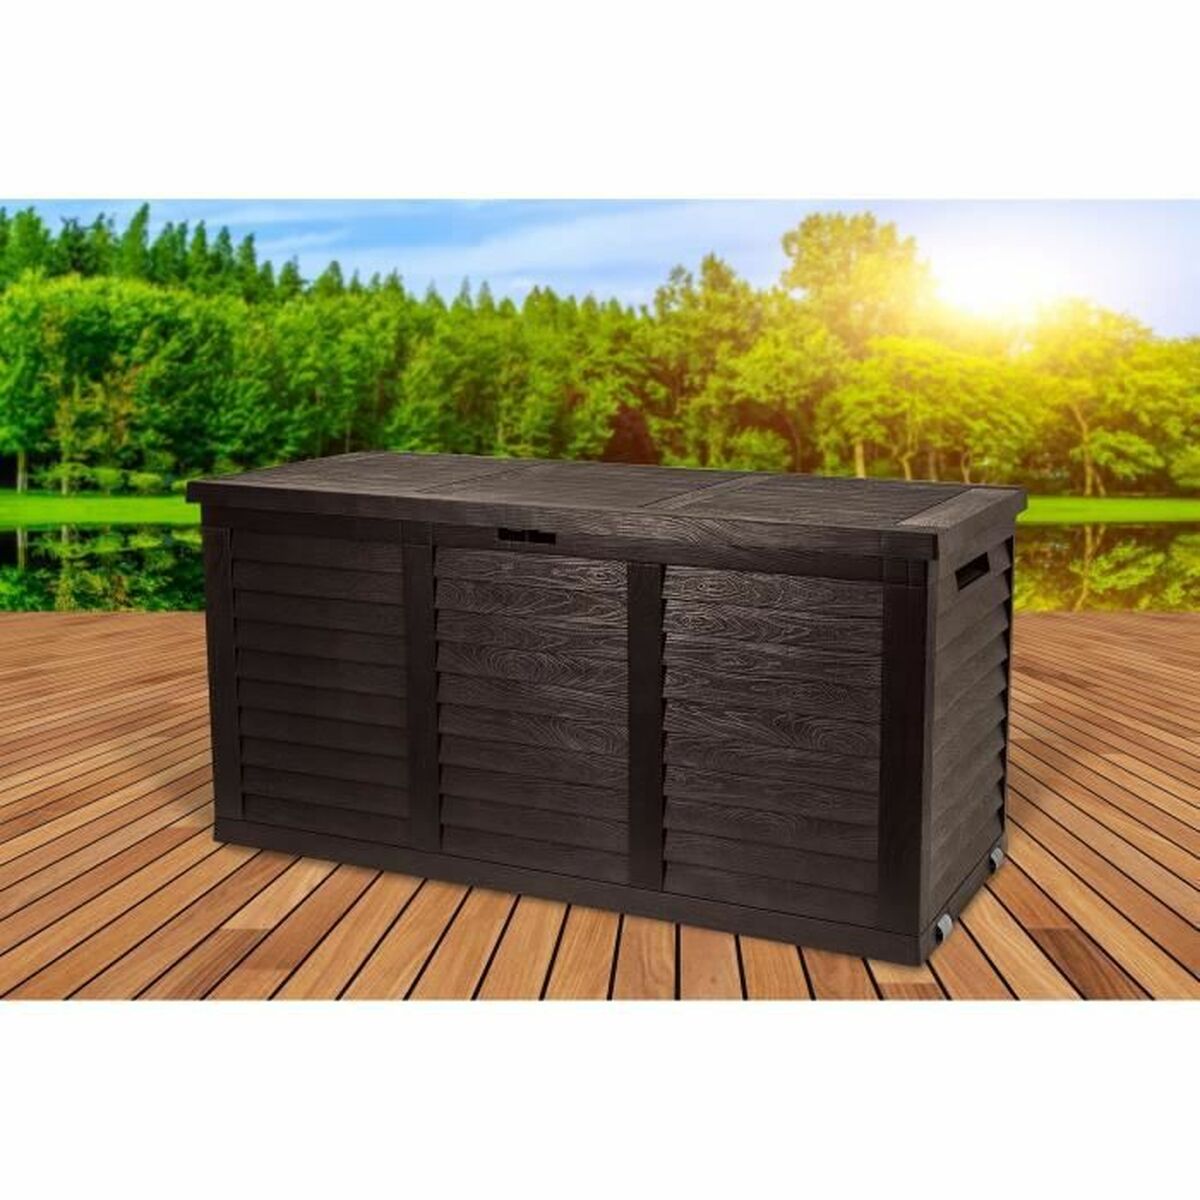 Outdoor Chest TOOD Brown Resin (119 x 52 x 58 cm)